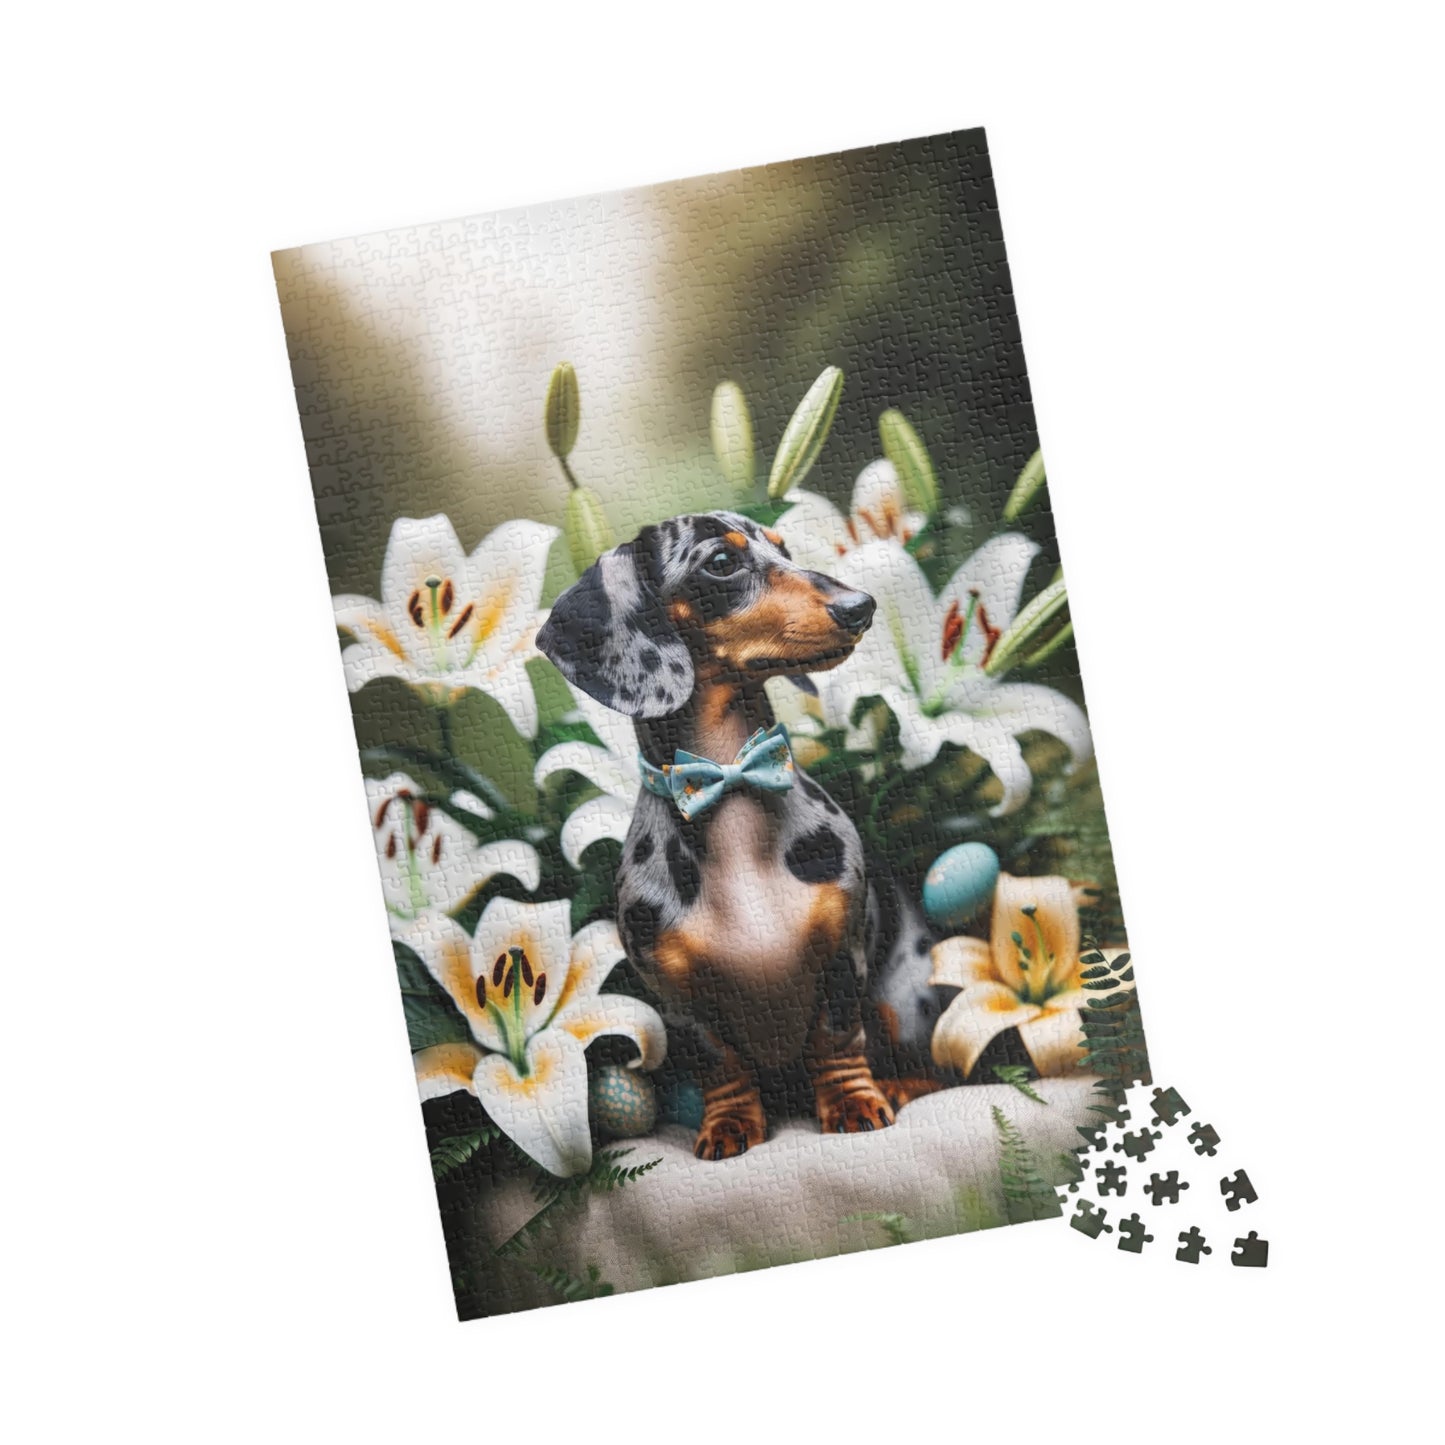 Spring Serenity Miniature Dachshund Jigsaw Puzzle - Tranquil Blue and Tan Dapple in Easter Lily Garden 110, 252, 520 or 1014 Pieces